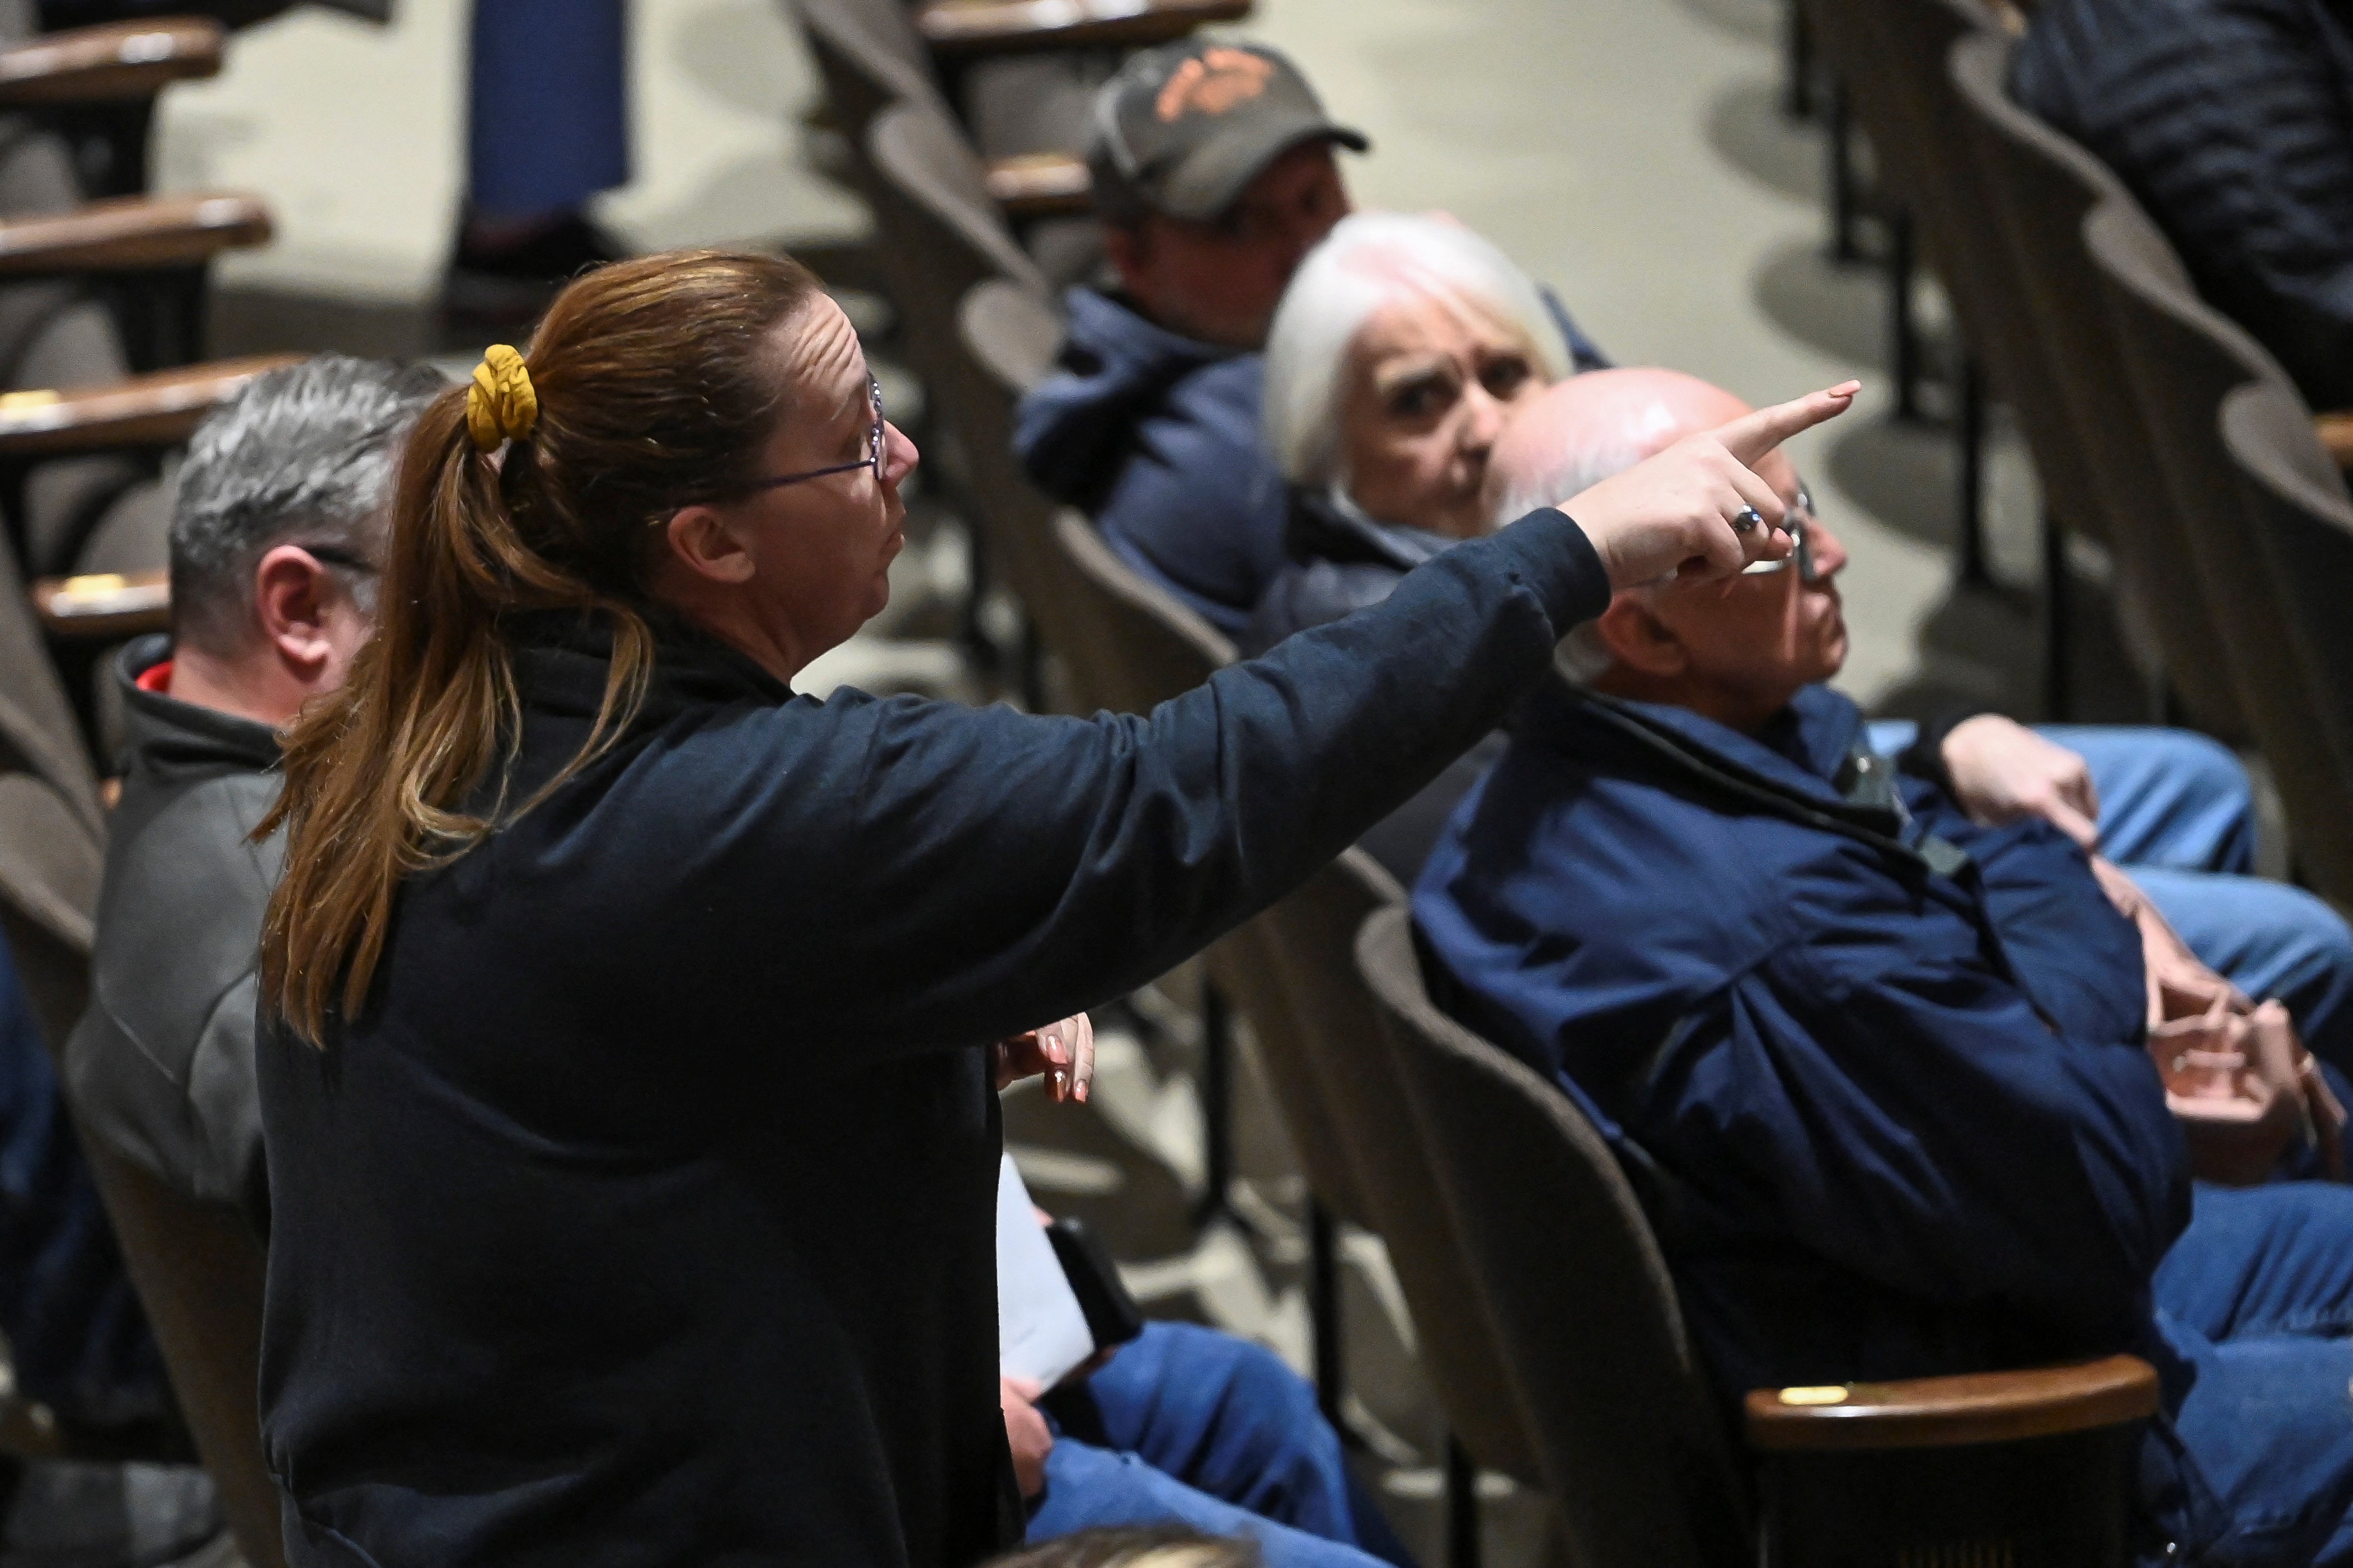 A woman points her finger during the town hall held in East Palestine on Thursday